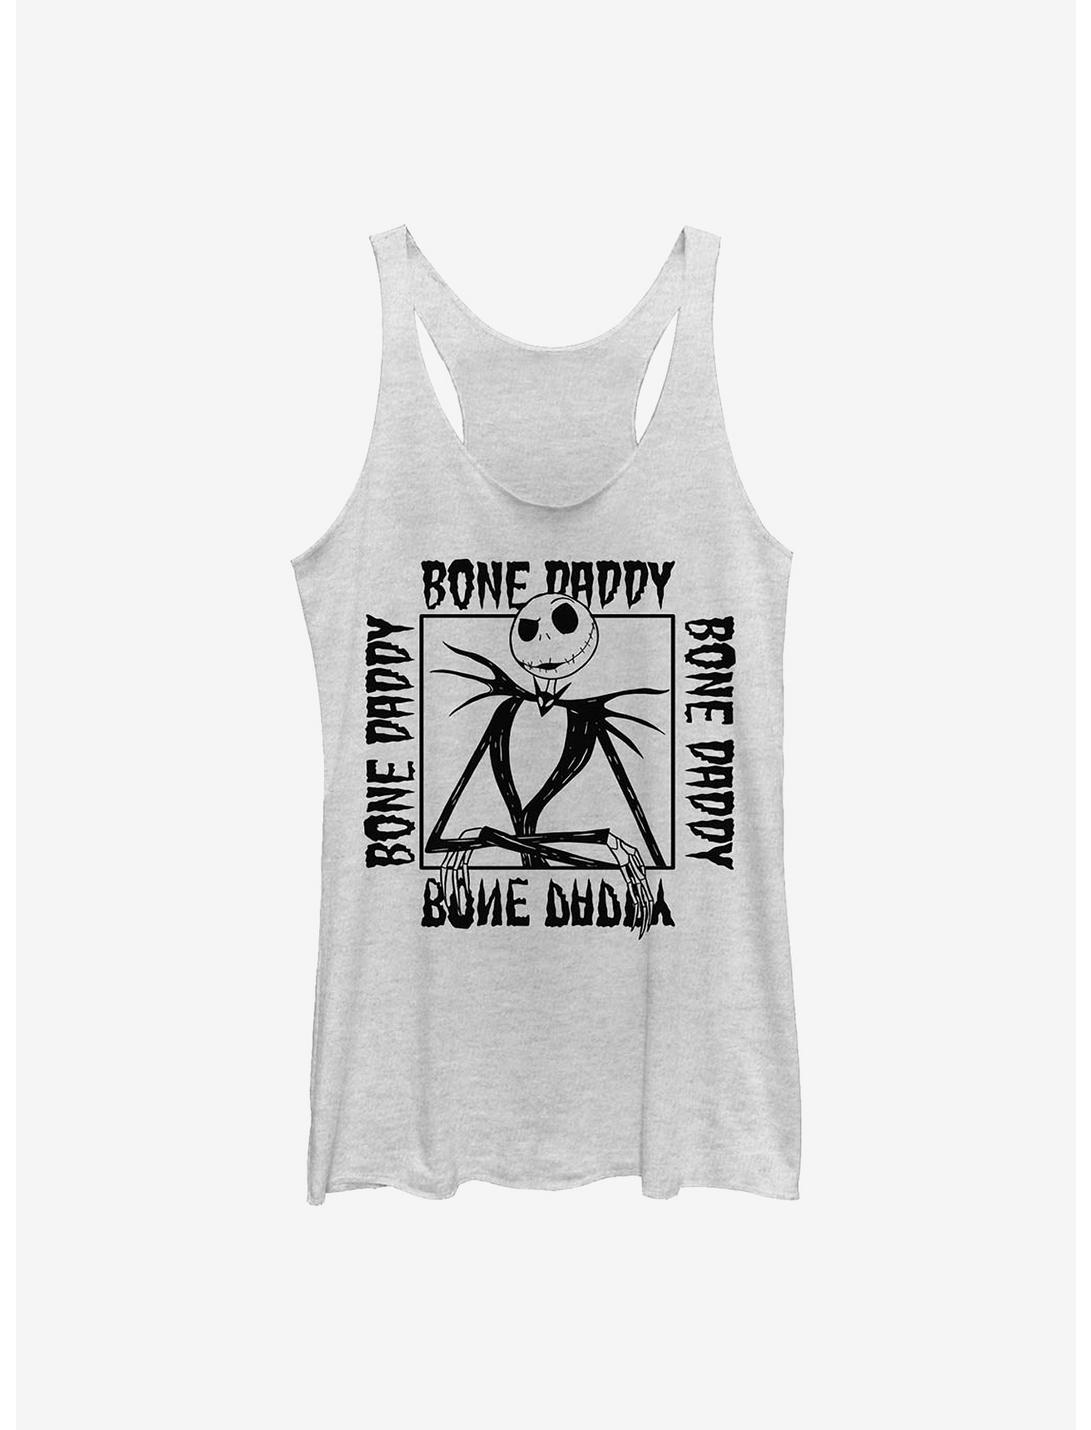 Plus Size Disney The Nightmare Before Christmas Bone Daddy Womens Tank Top, WHITE HTR, hi-res